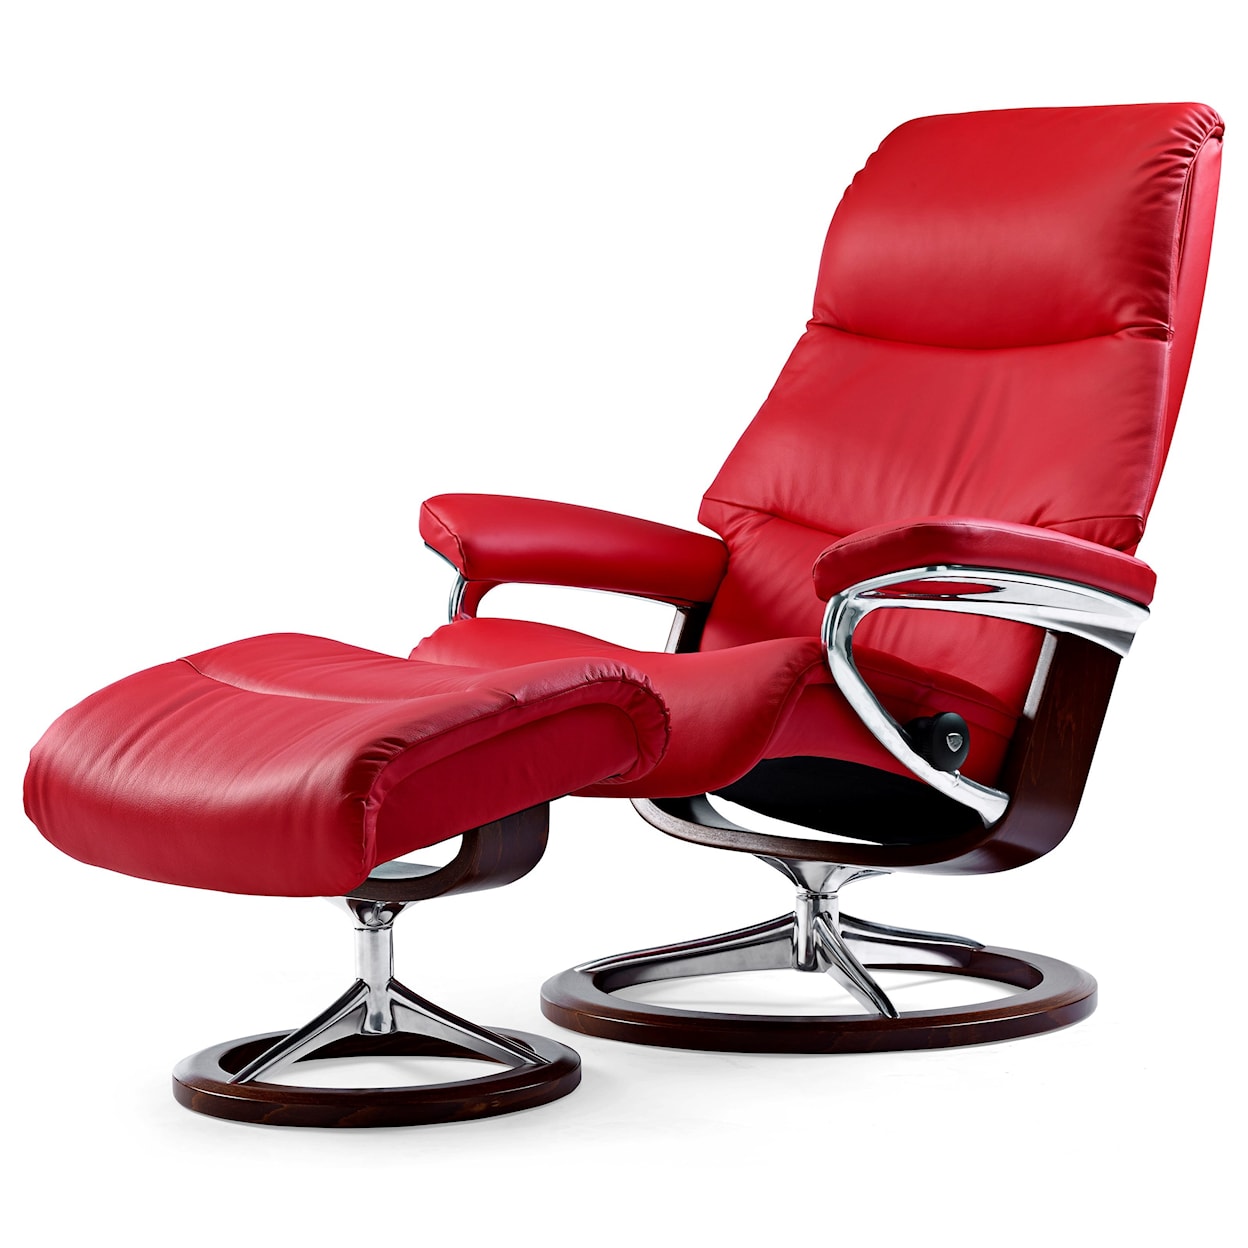 Stressless by Ekornes View Large Chair & Ottoman with Signature Base